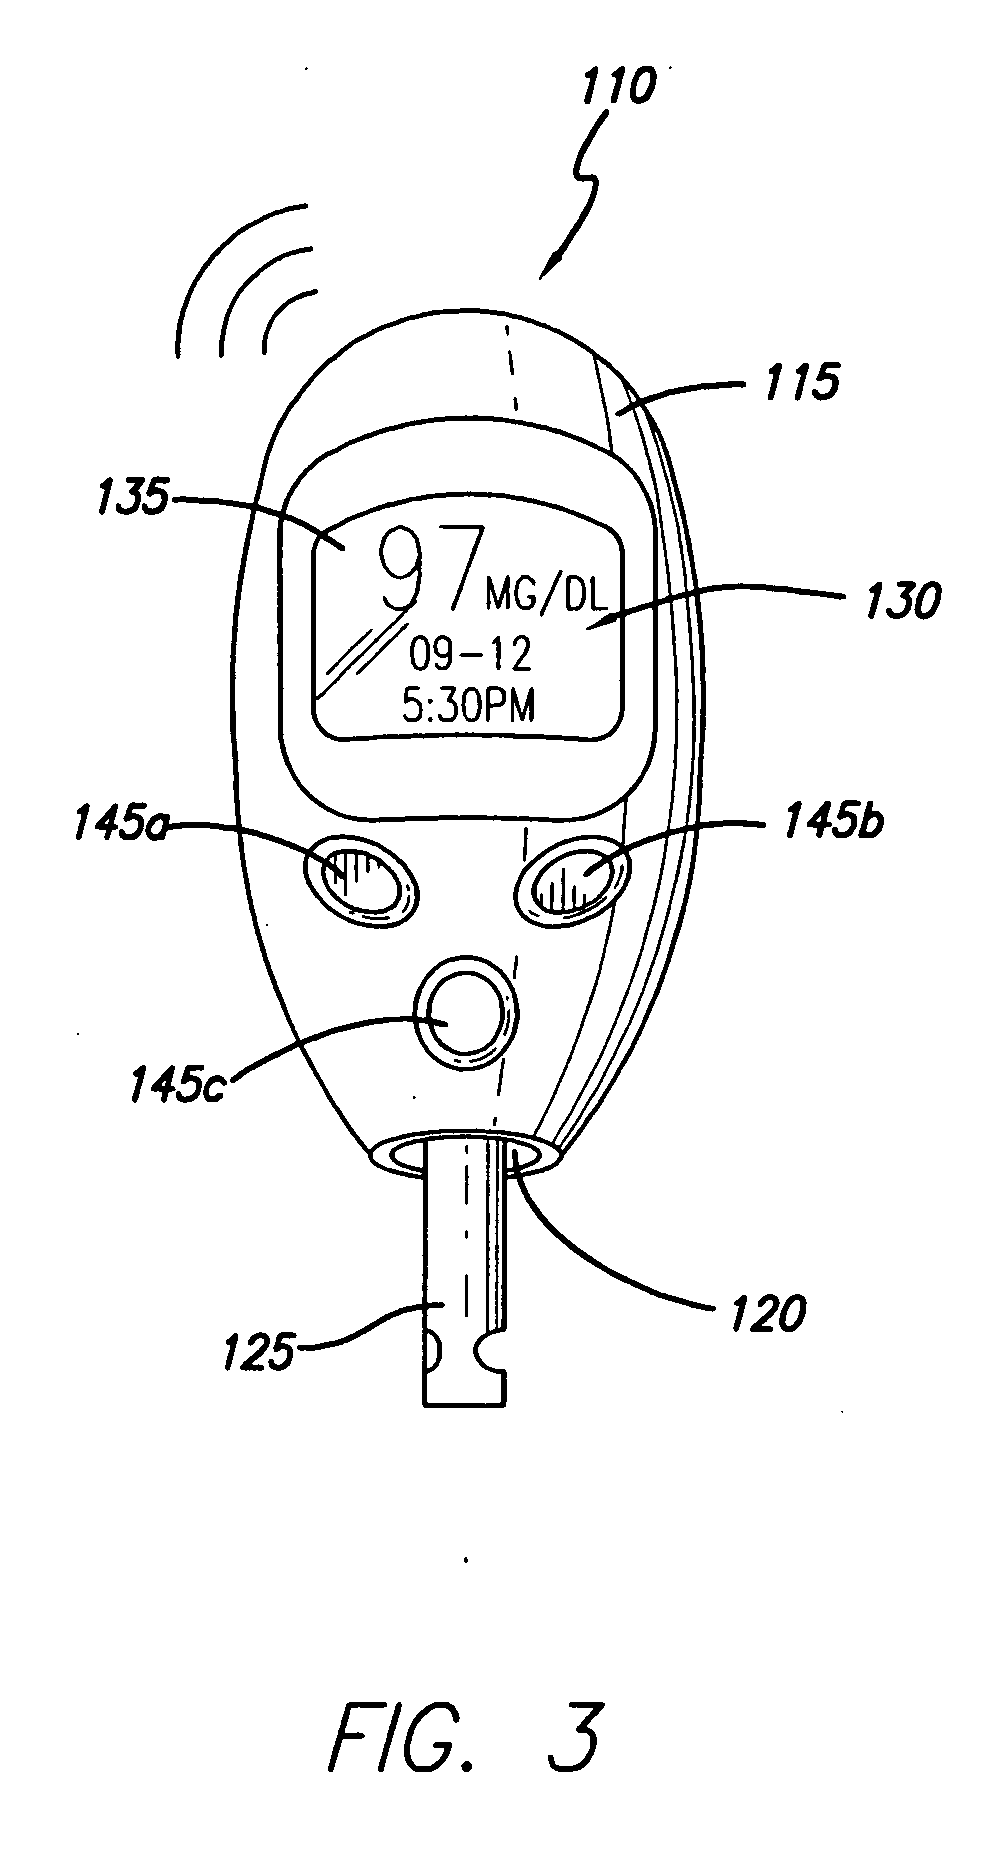 Watch controller for a medical device